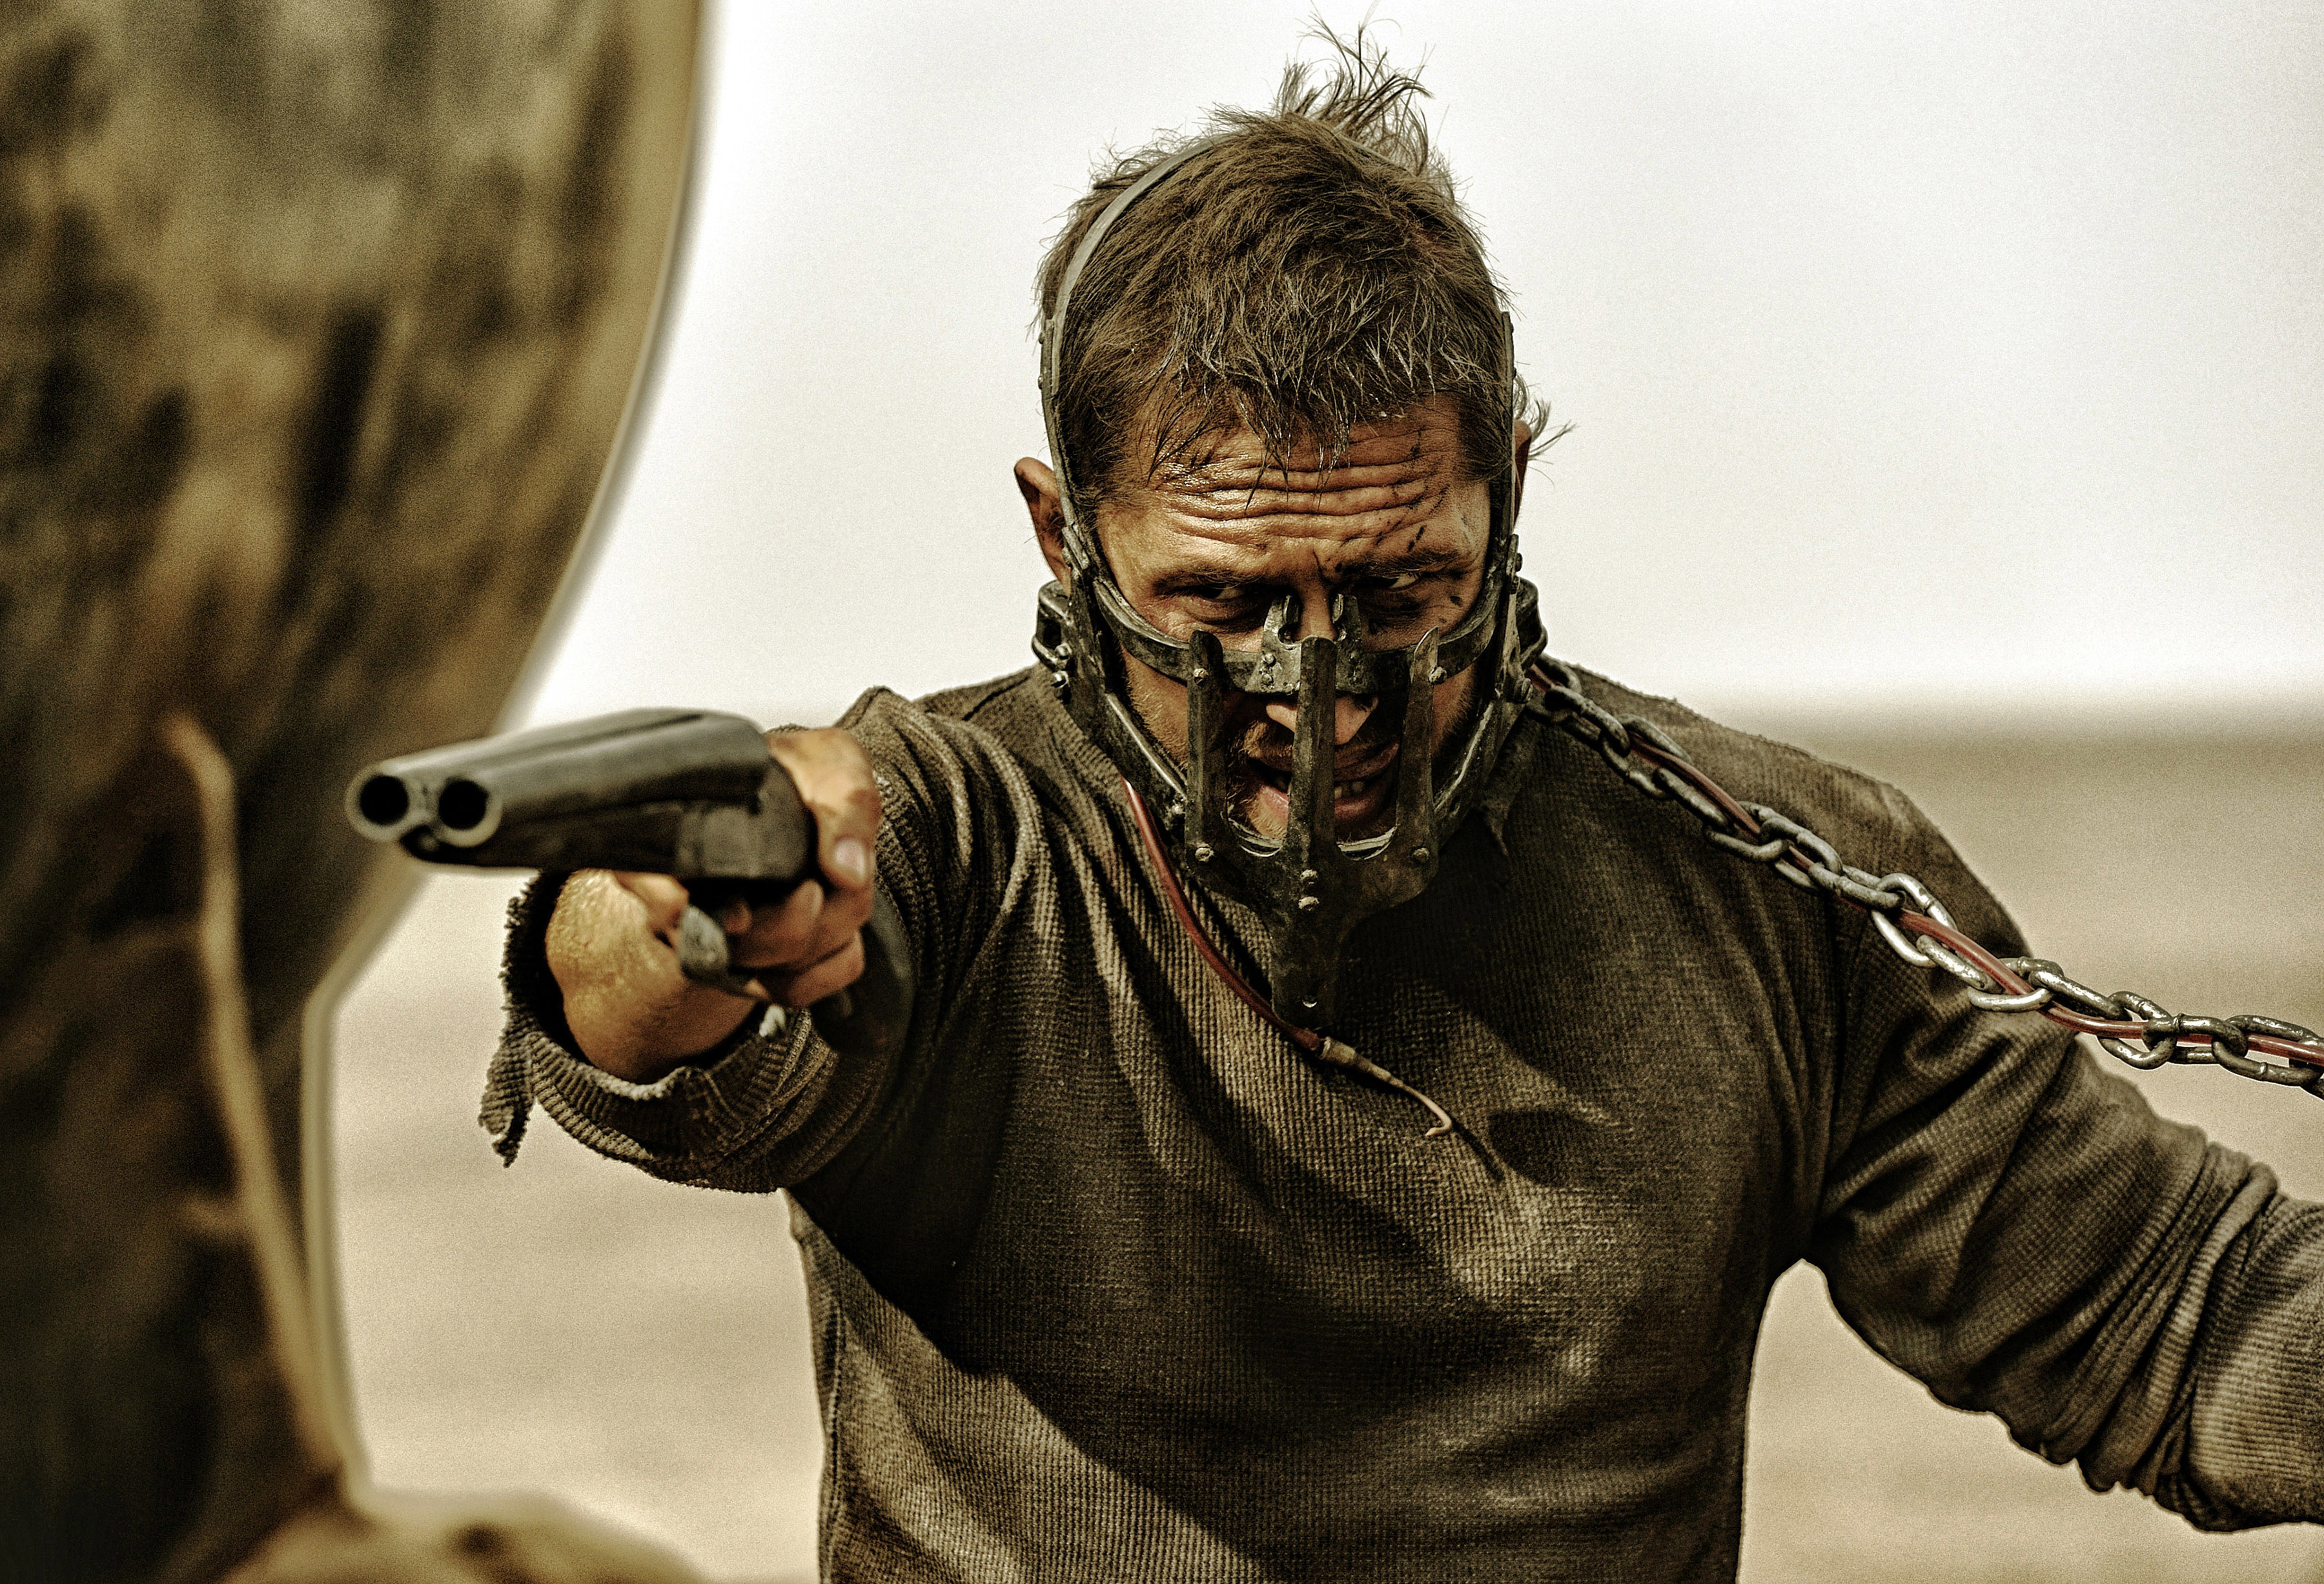 tom hardy with muzzle on pointing a gun